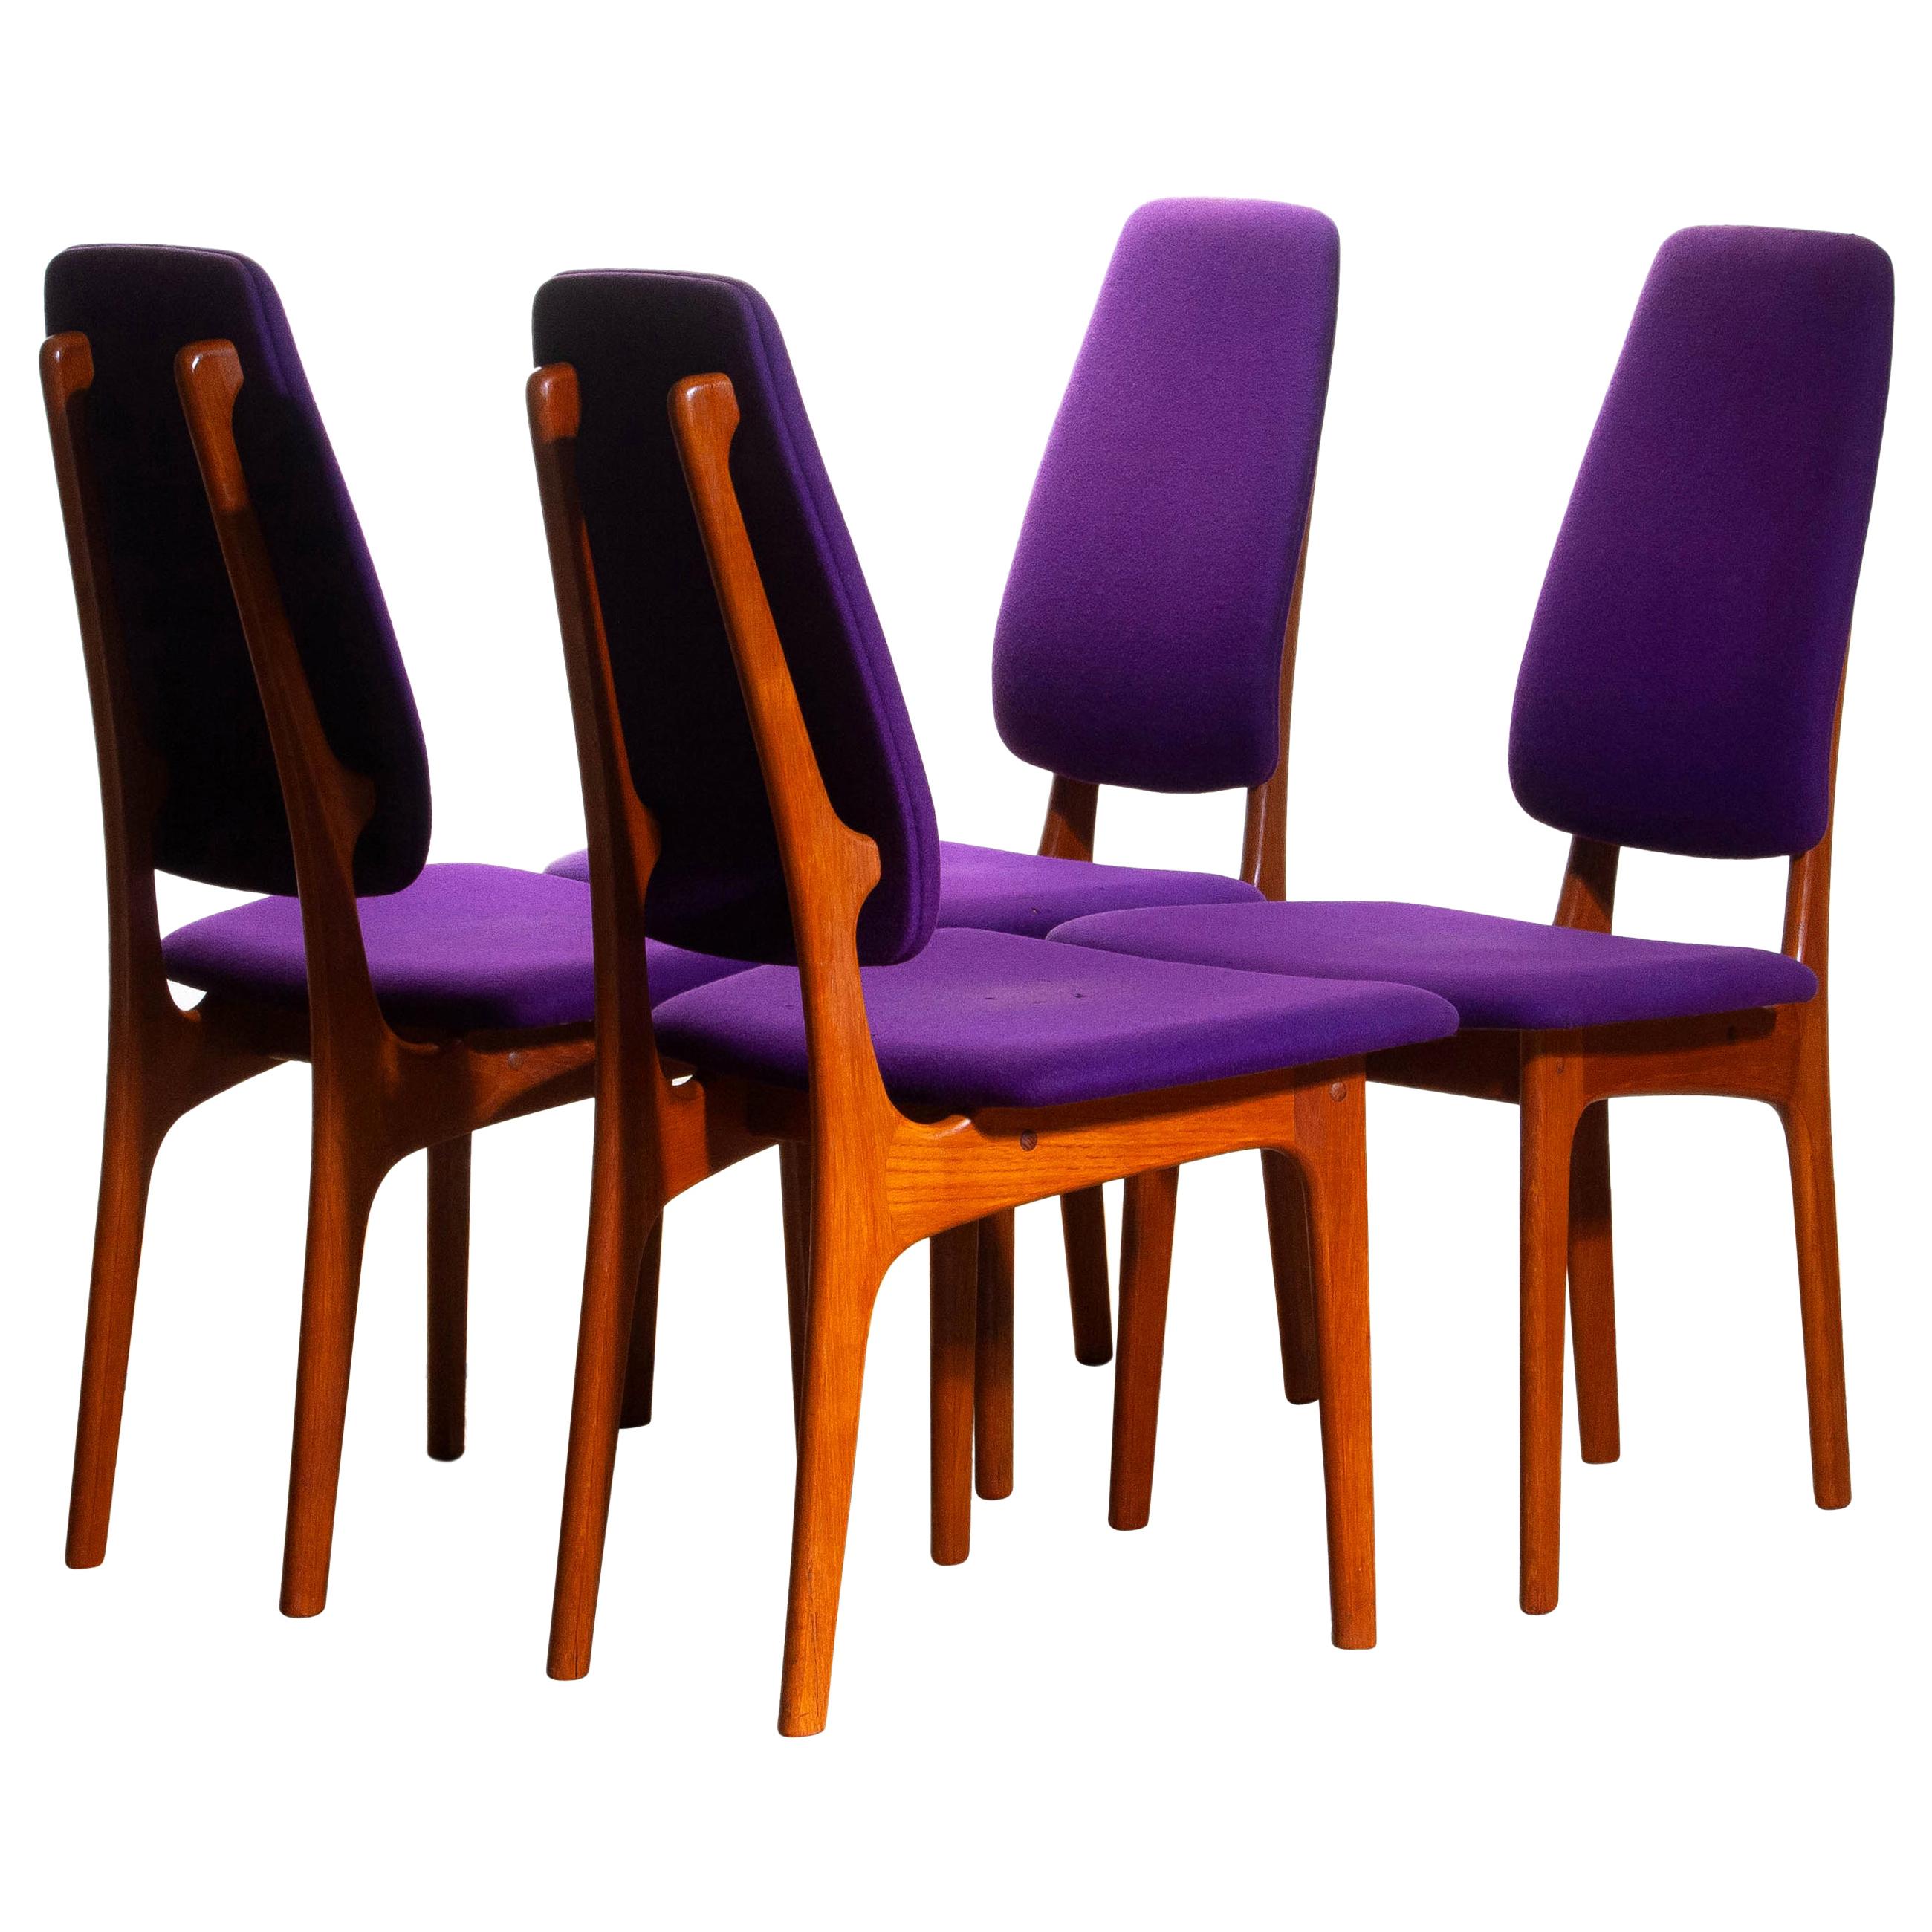 Rare set of four dining chairs from the 1960s in teak designed by Erik Buch for O.D. Möbler A.S., Denmark.
Beautiful aspect are the slim and high back rests.
Chairs are marked 